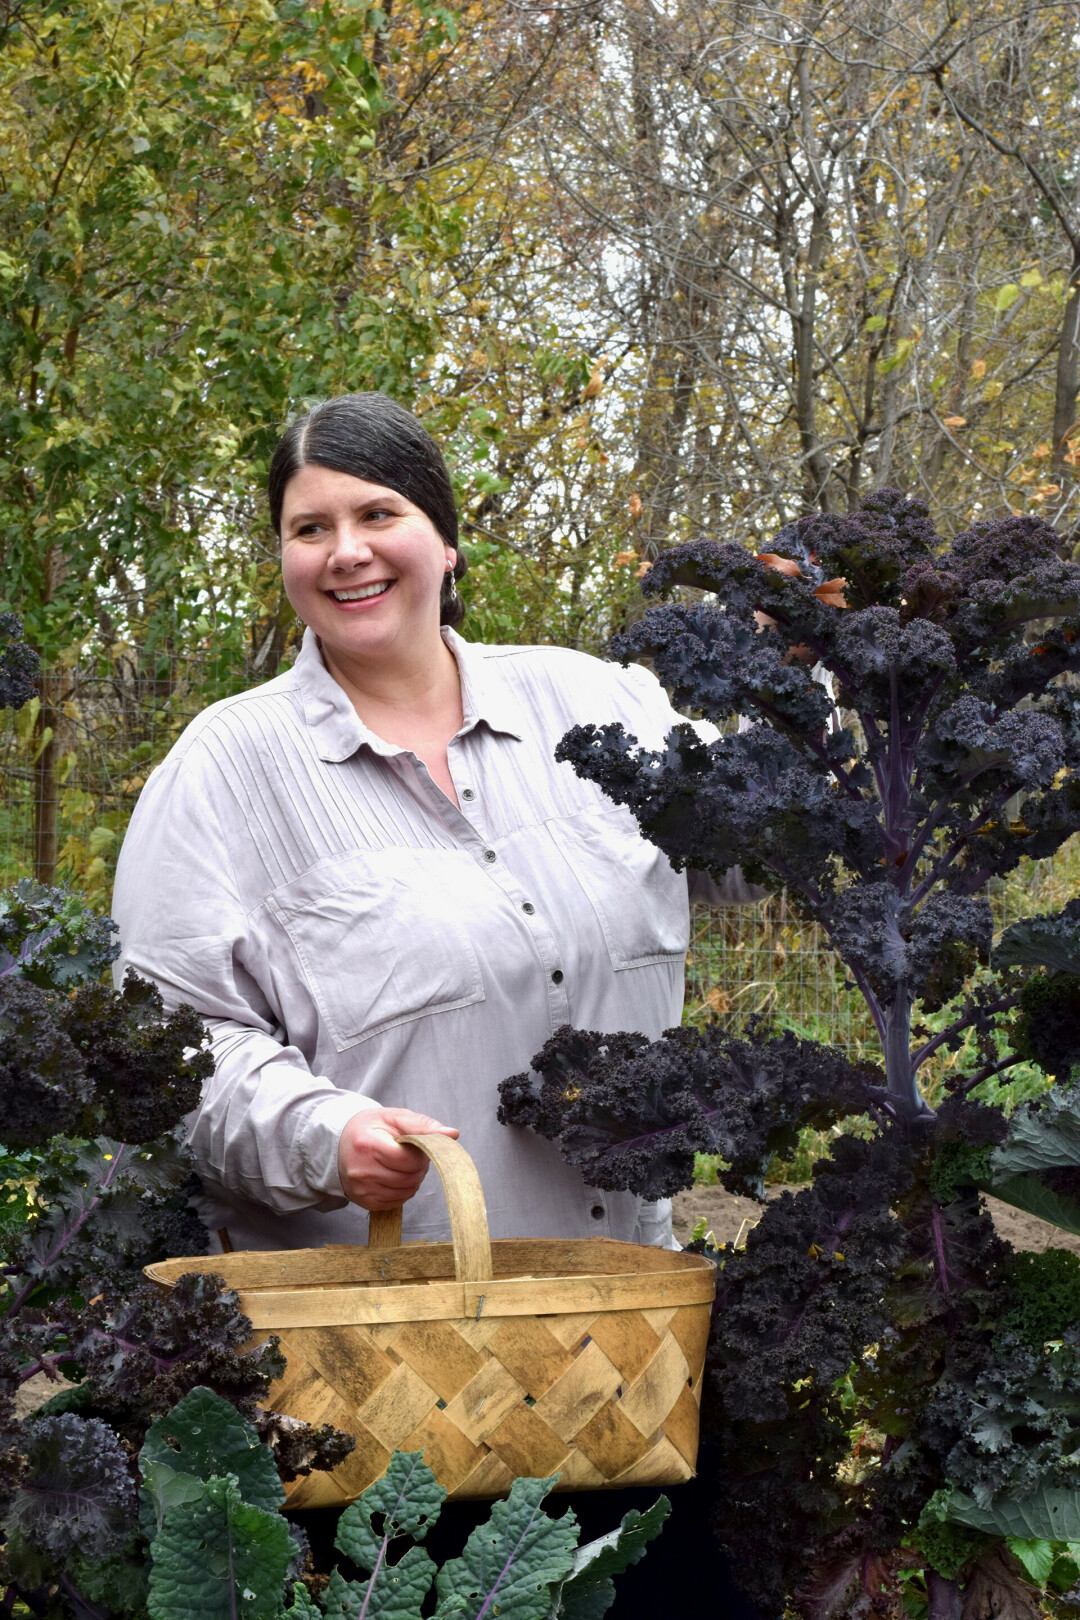 UWEC alum, Crystal Schmidt, is releasing ‘Freeze Fresh,’ a book about preserving produce